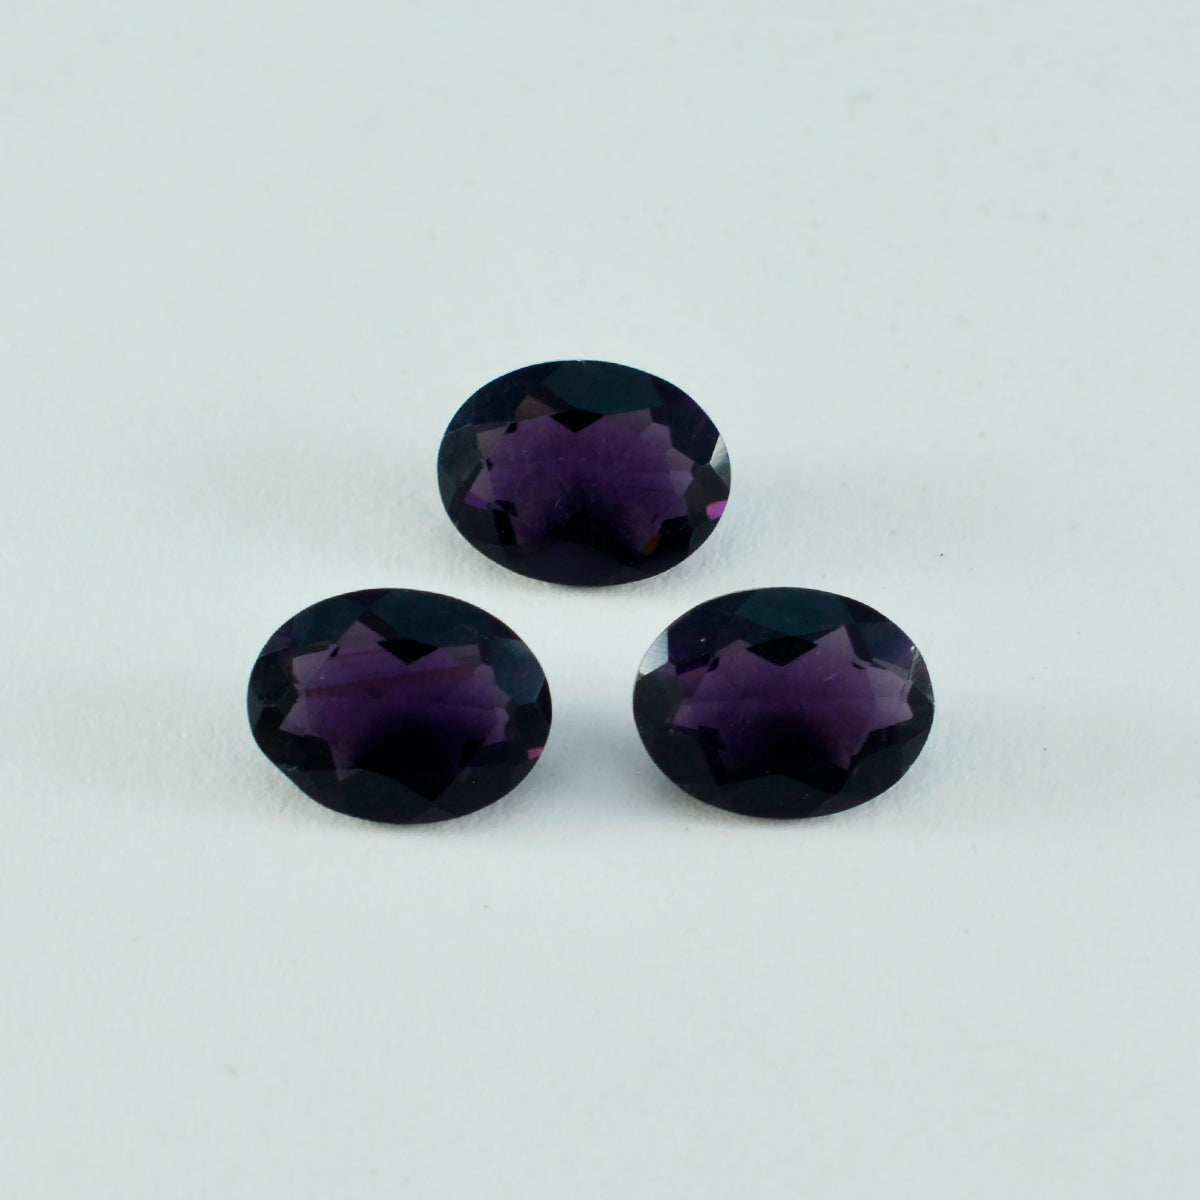 Riyogems 1PC Purple Amethyst CZ Faceted 10x14 mm Oval Shape awesome Quality Loose Stone